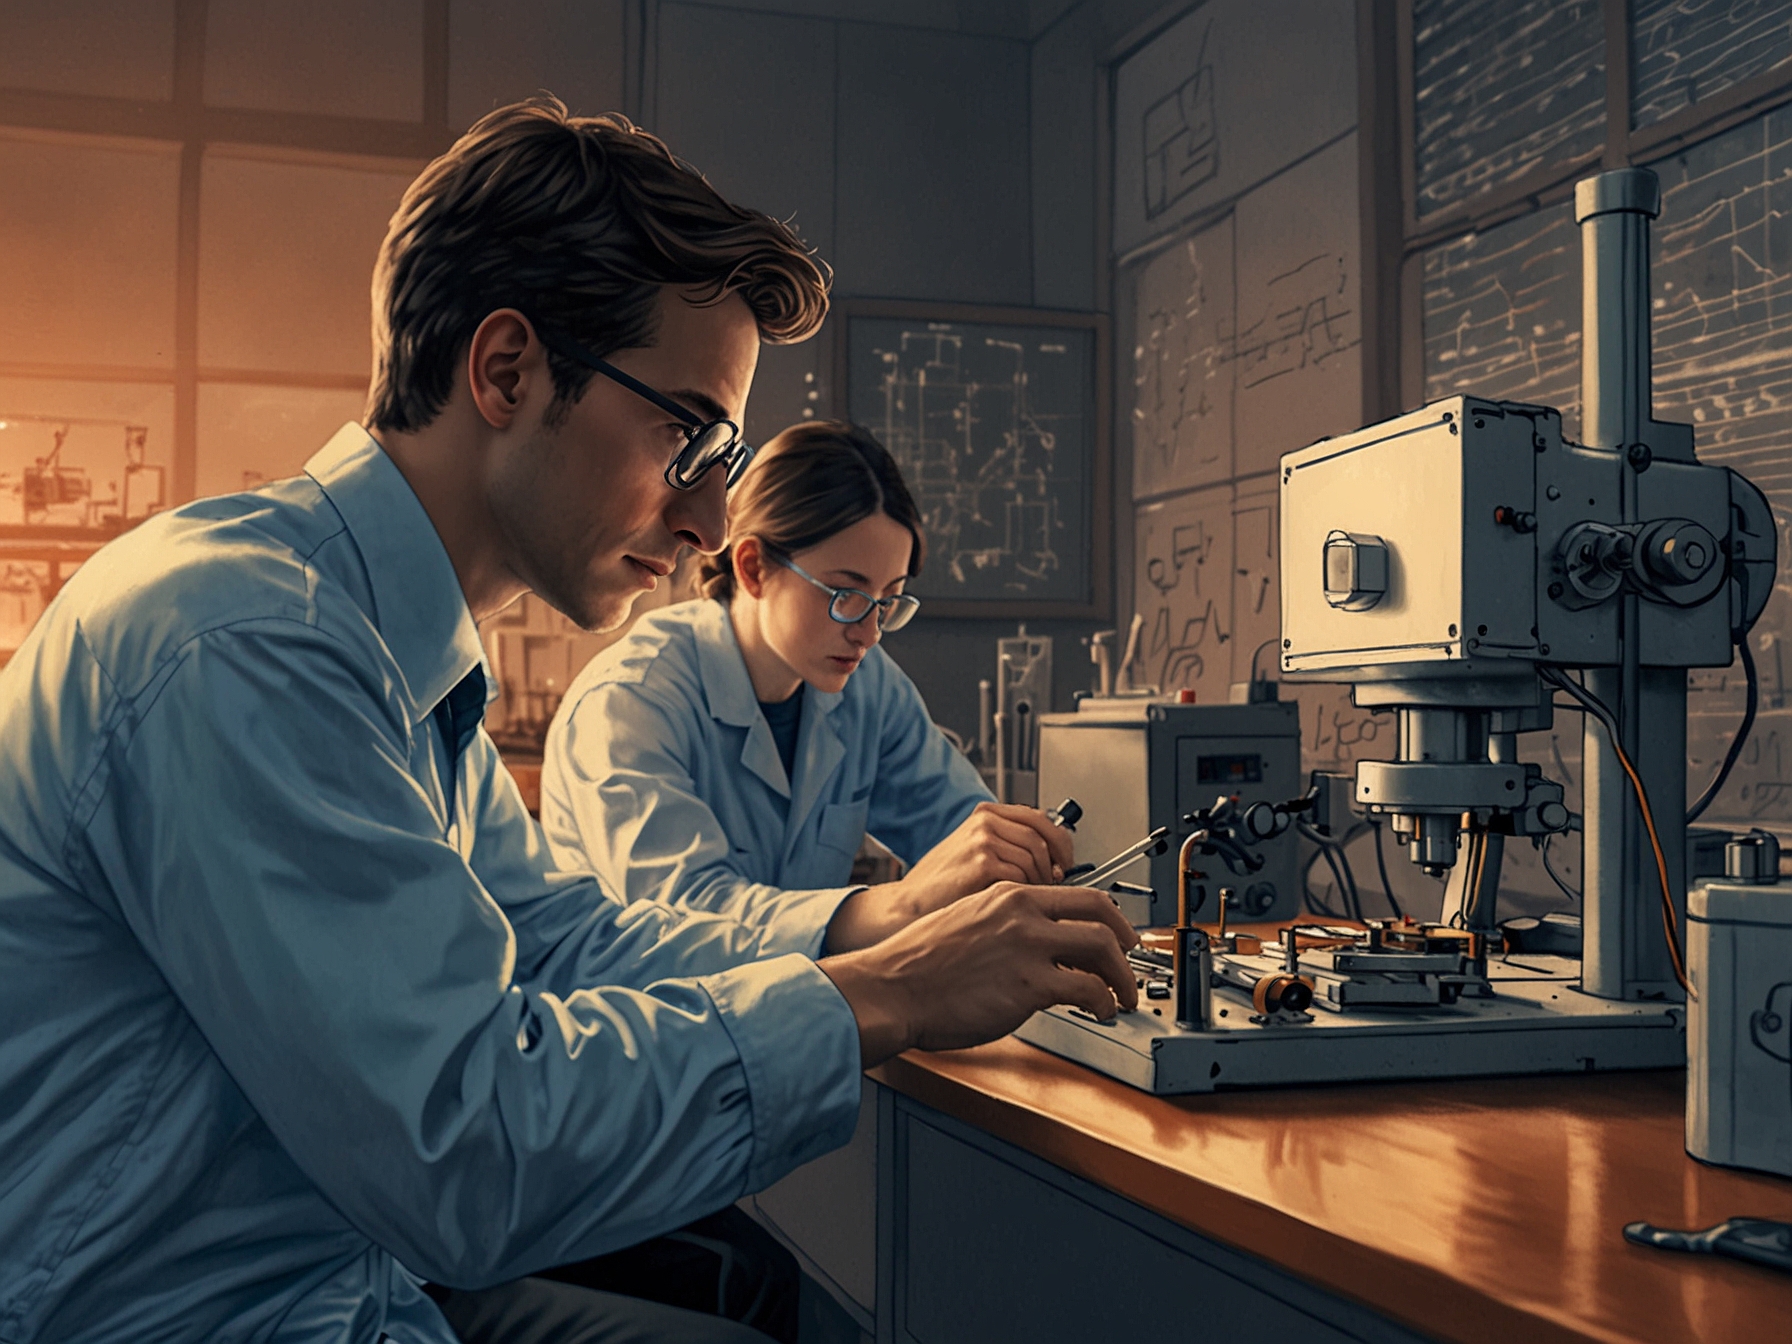 Illustration of researchers using high-resolution microscopy and spectroscopy techniques to measure thermal expansion in atom-thin materials, highlighting the advanced equipment used.